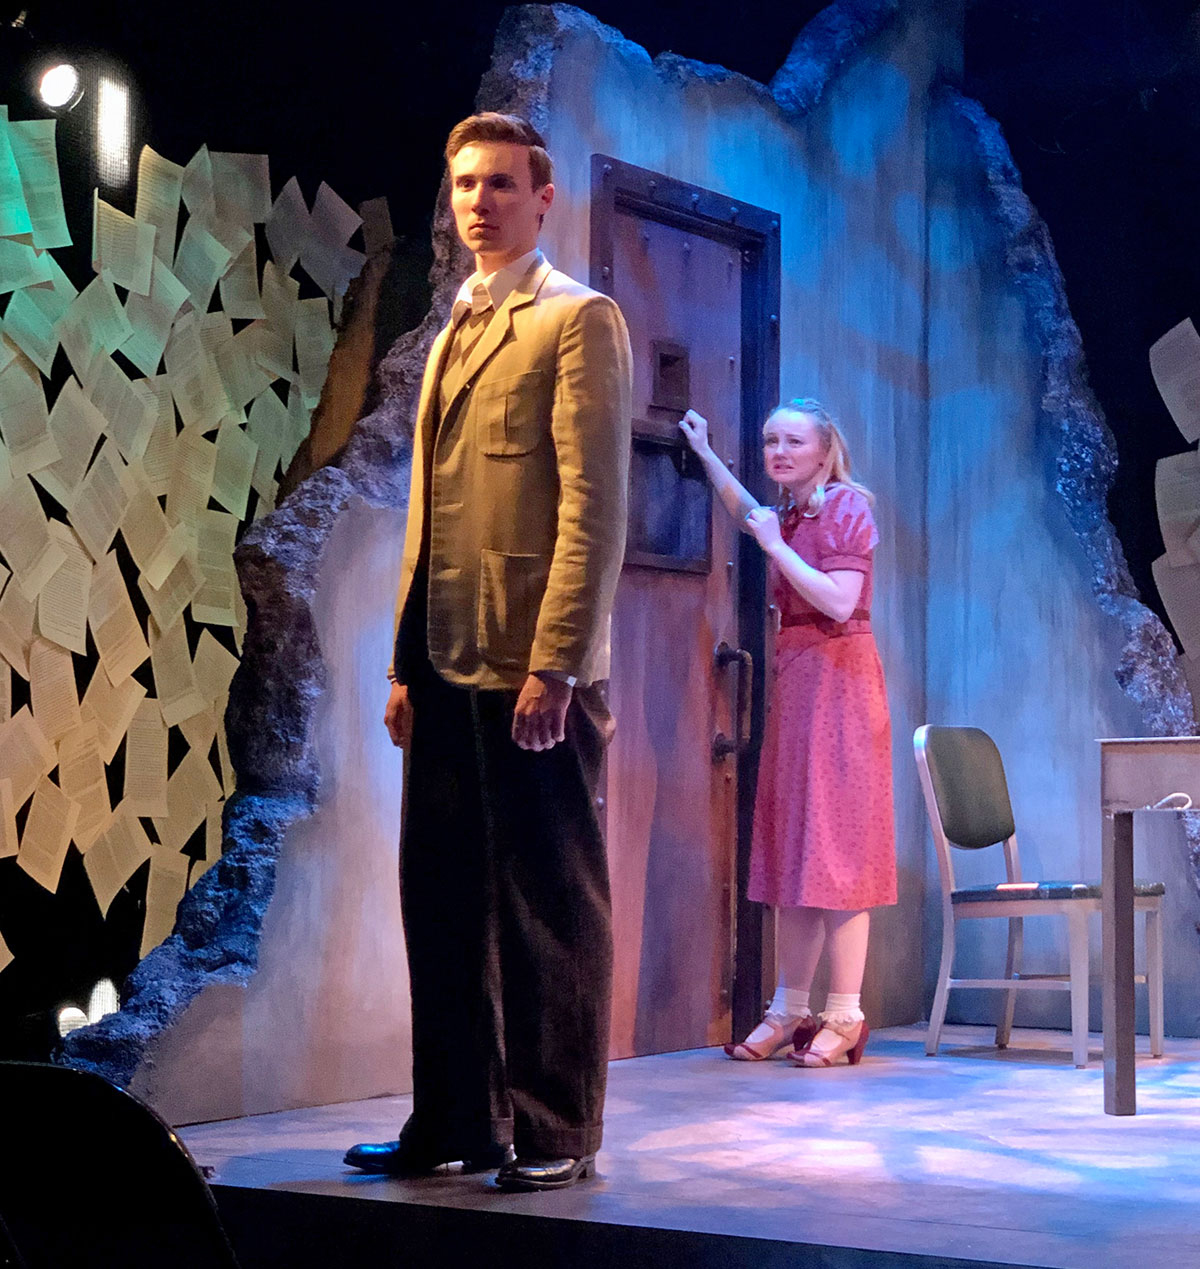 Jordan Luty (left) is Hans Scholl and Morgan Lynn is Sophie Scholl in “The White Rose.” Credit: Courtesy of The Coterie Theatre.